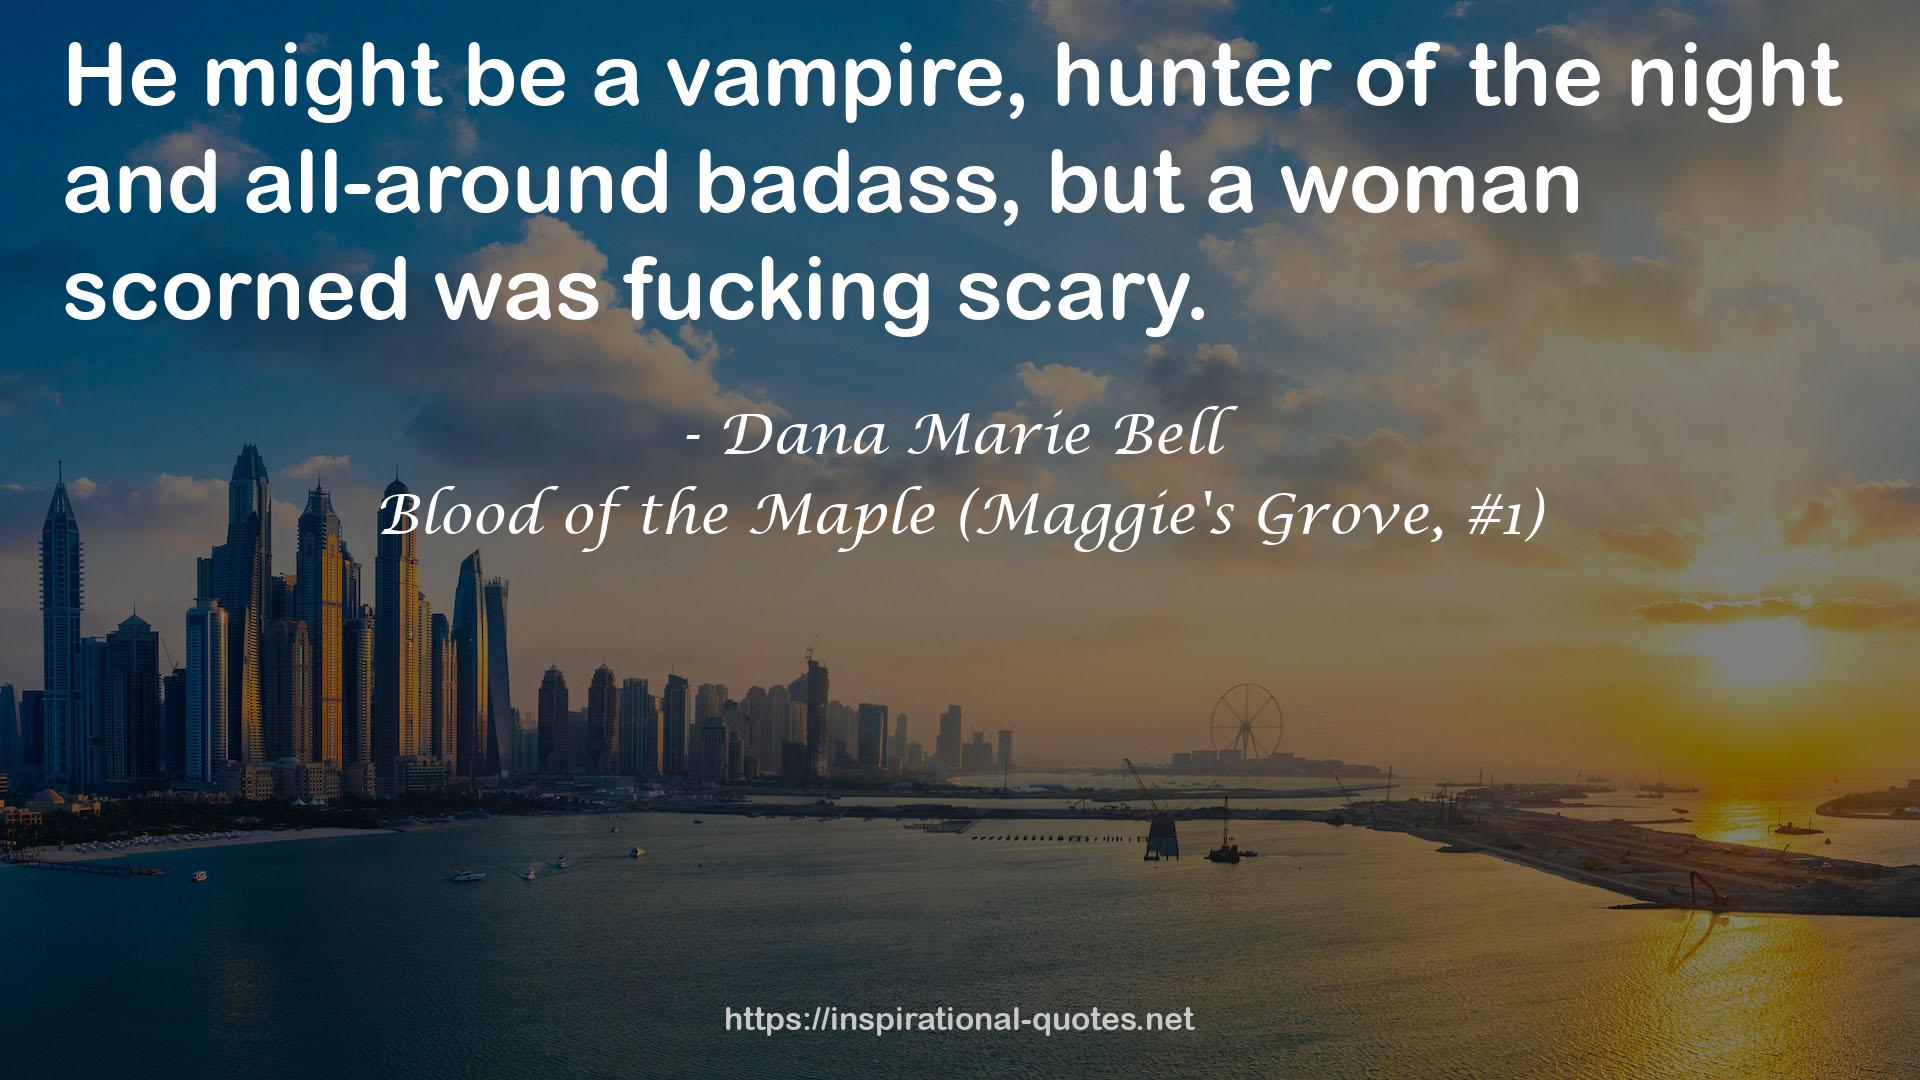 Blood of the Maple (Maggie's Grove, #1) QUOTES